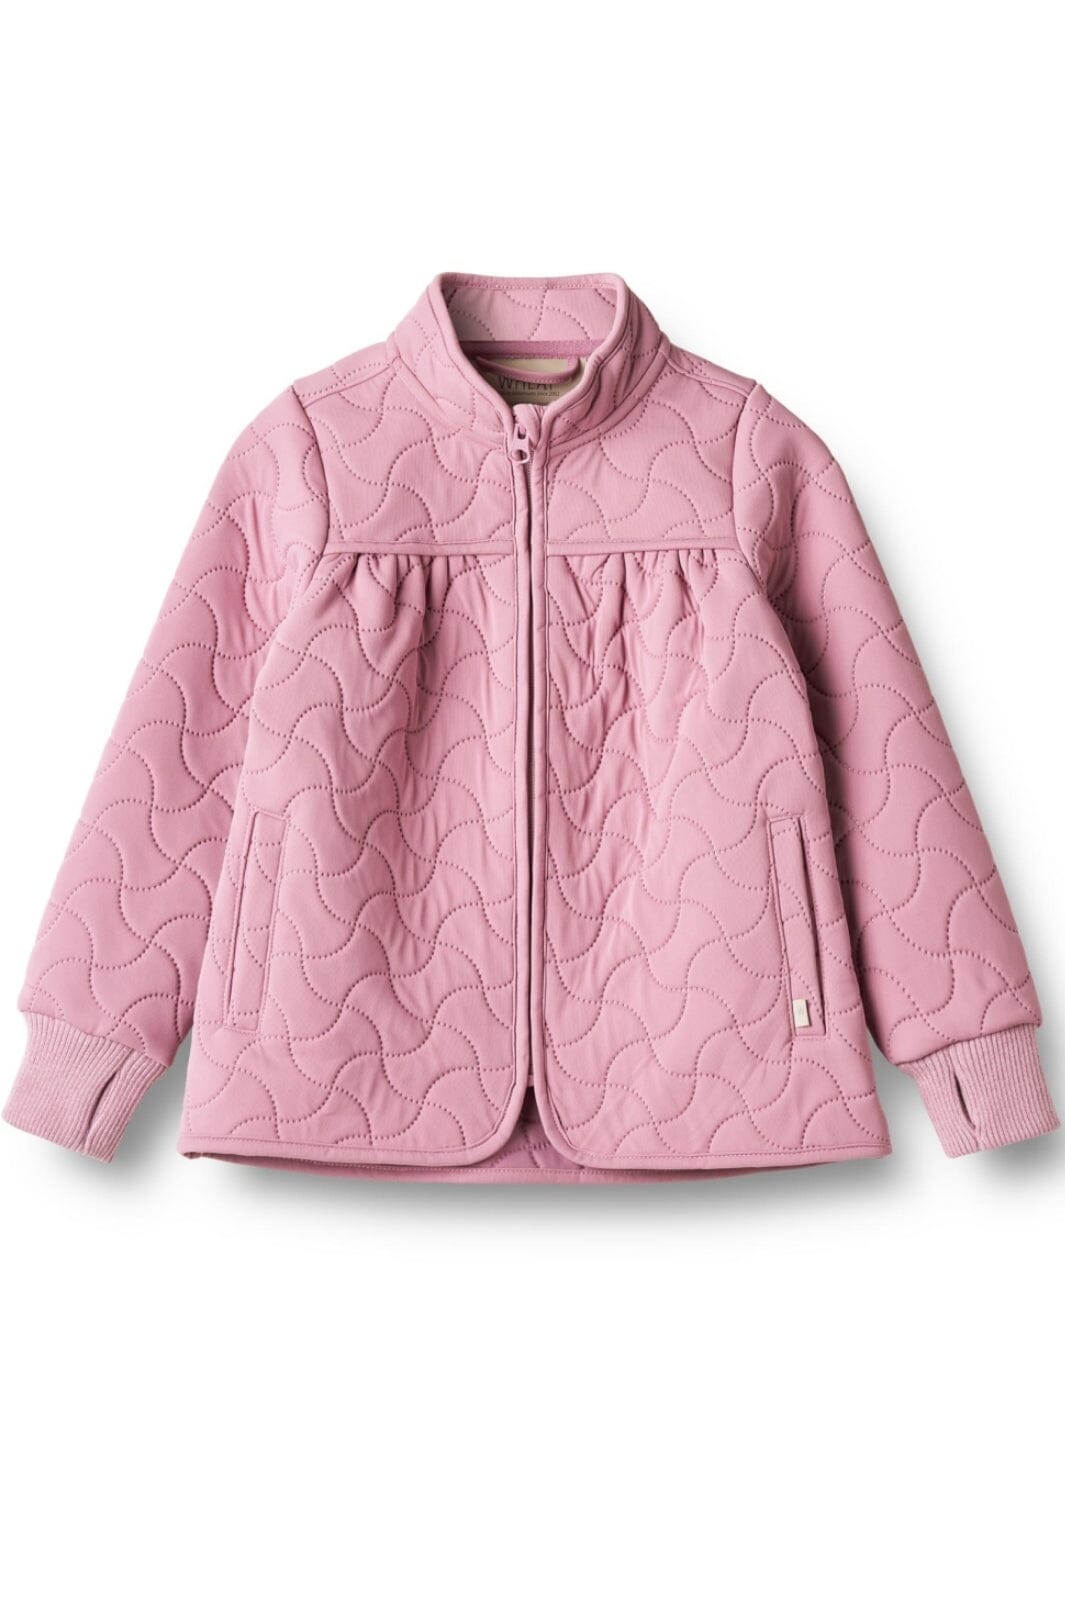 Wheat - Thermo Jacket Thilde - 1161 Spring Lilac Termojakker 